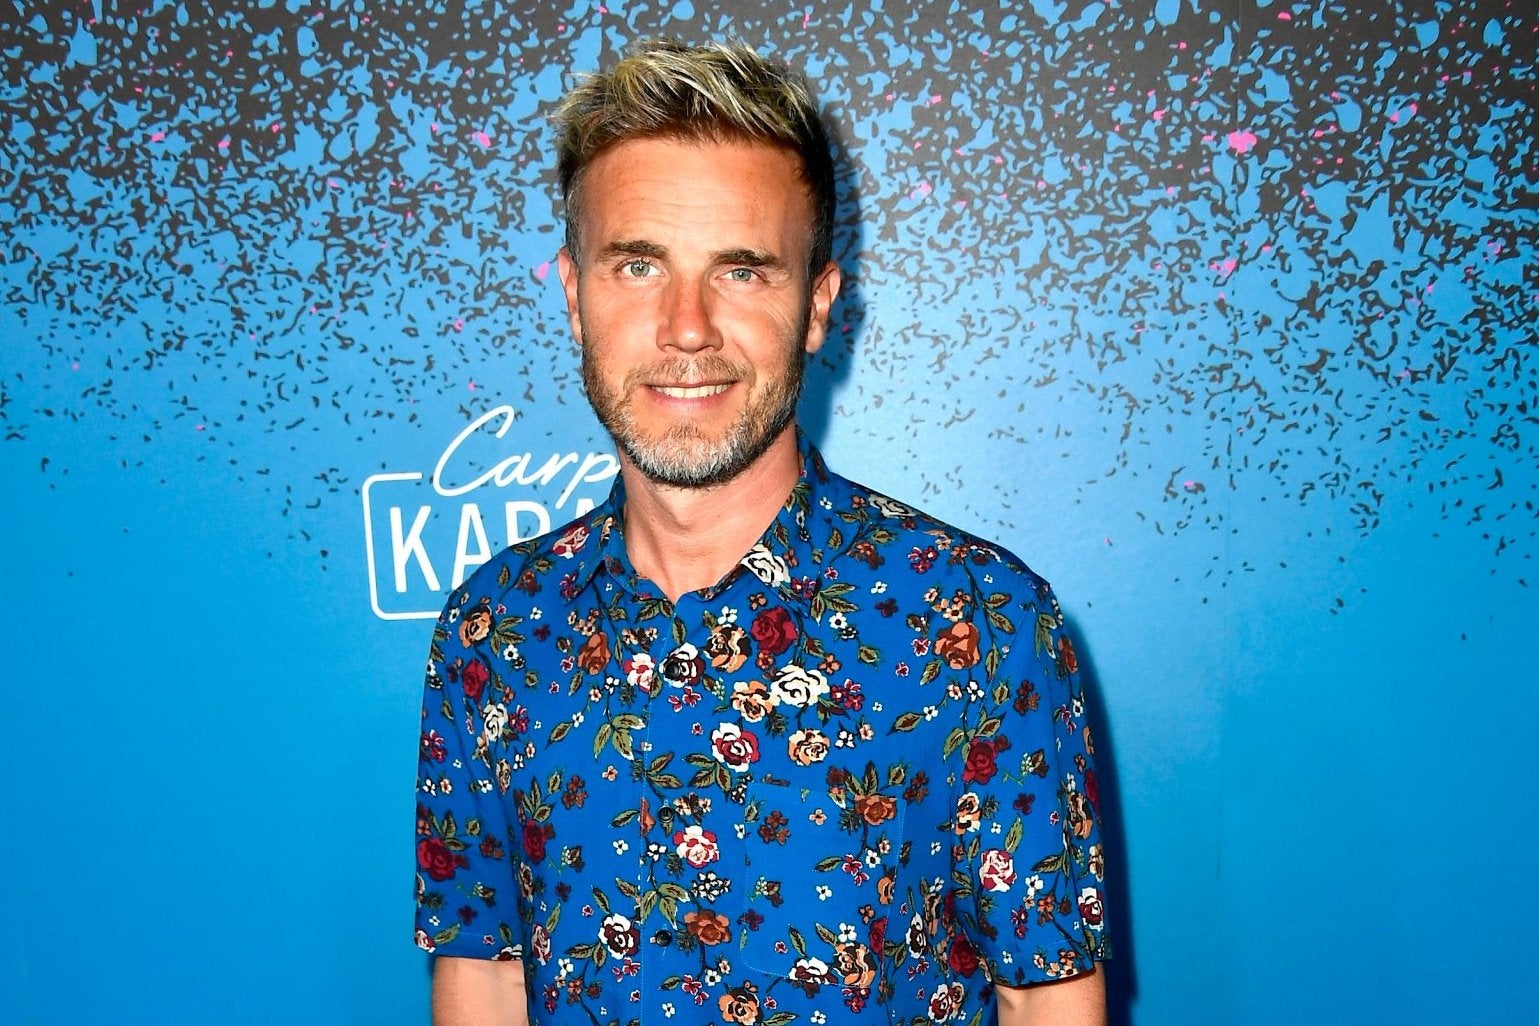 Singer Gary Barlow attends 'Carpool Karaoke: The Series' On Apple Music Launch Party